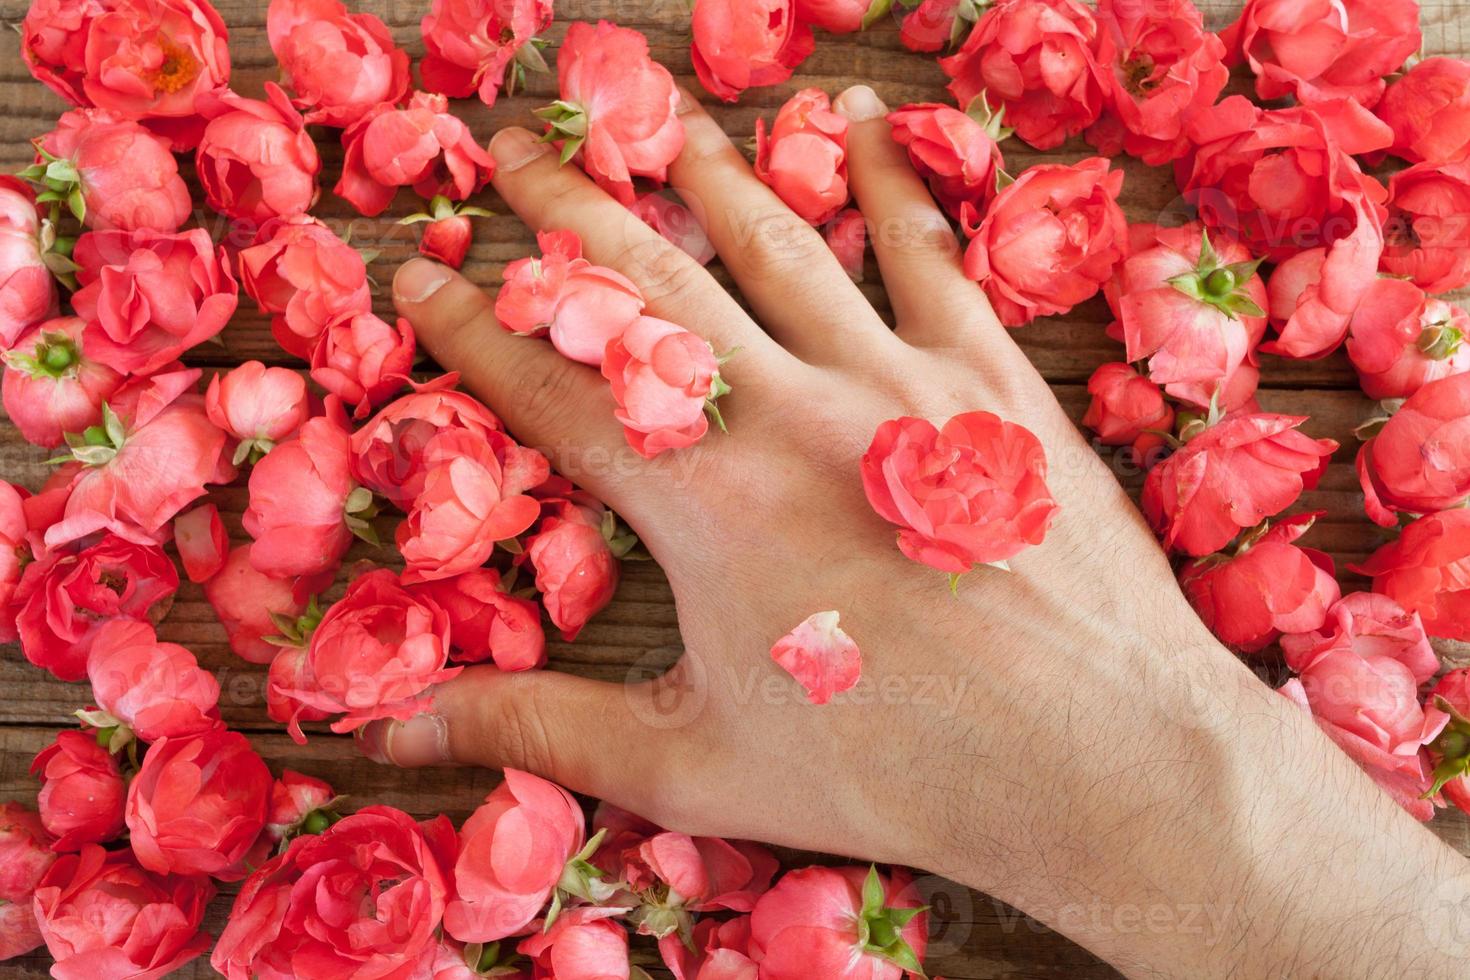 hand among red roses on a wooden table photo